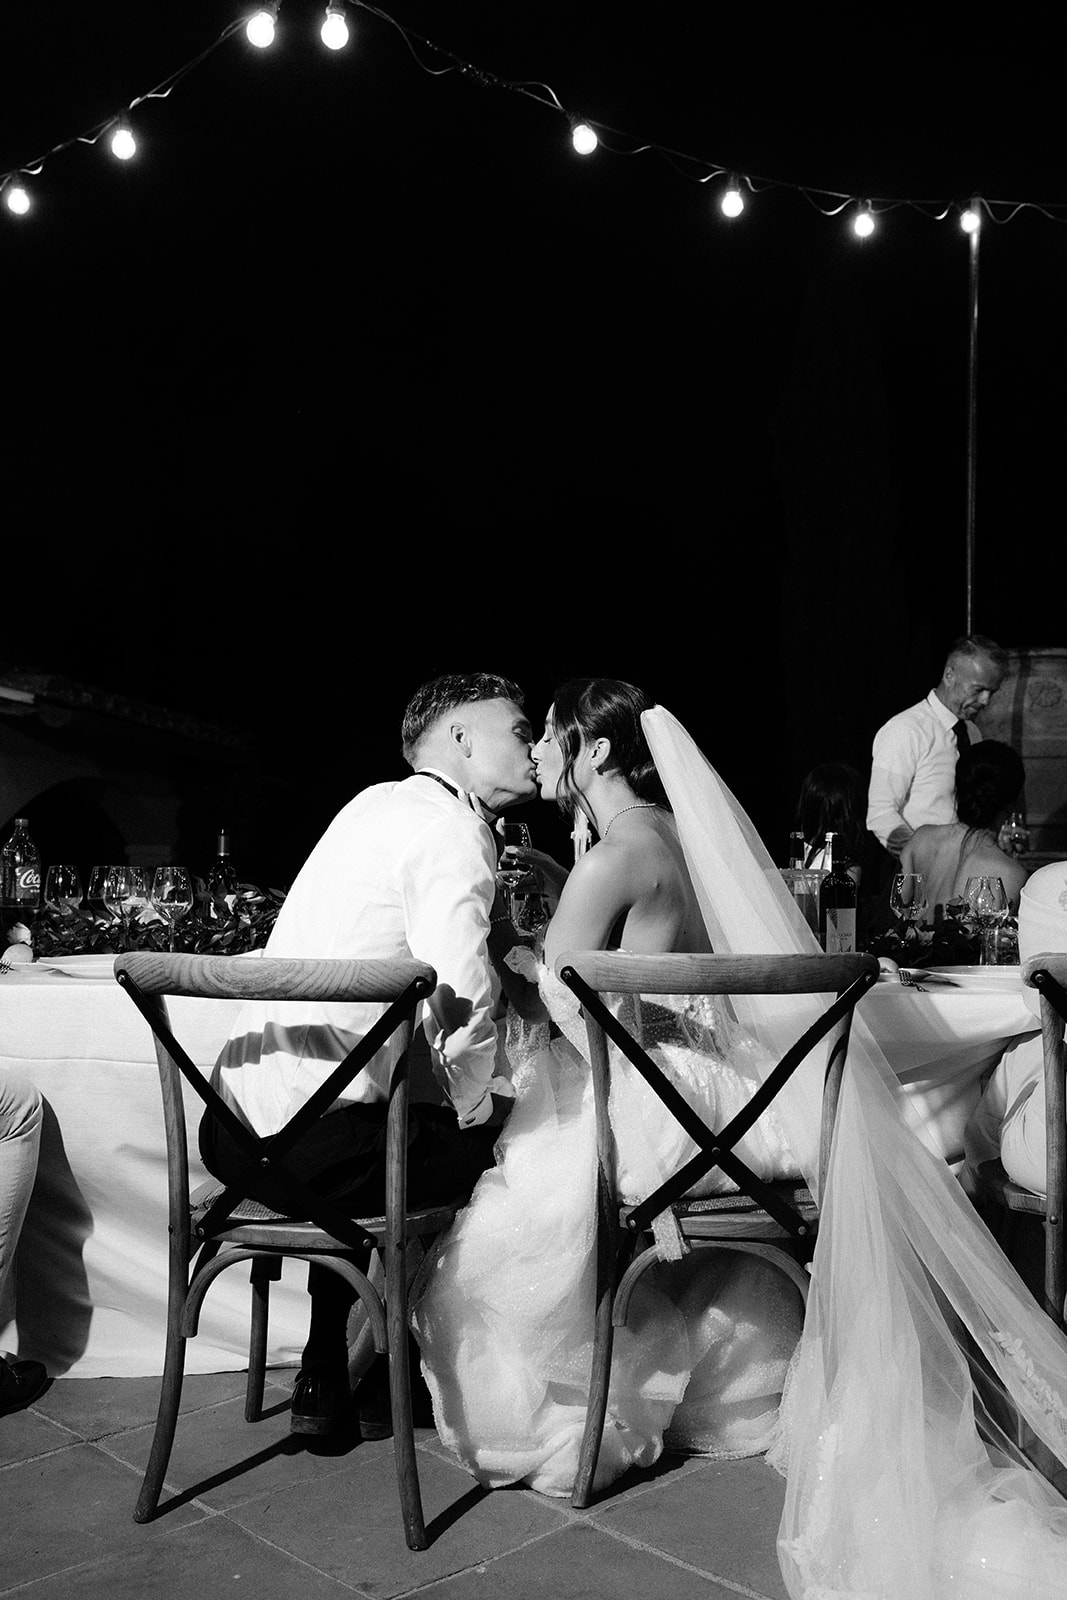 The kiss of the newlyweds seen from behind